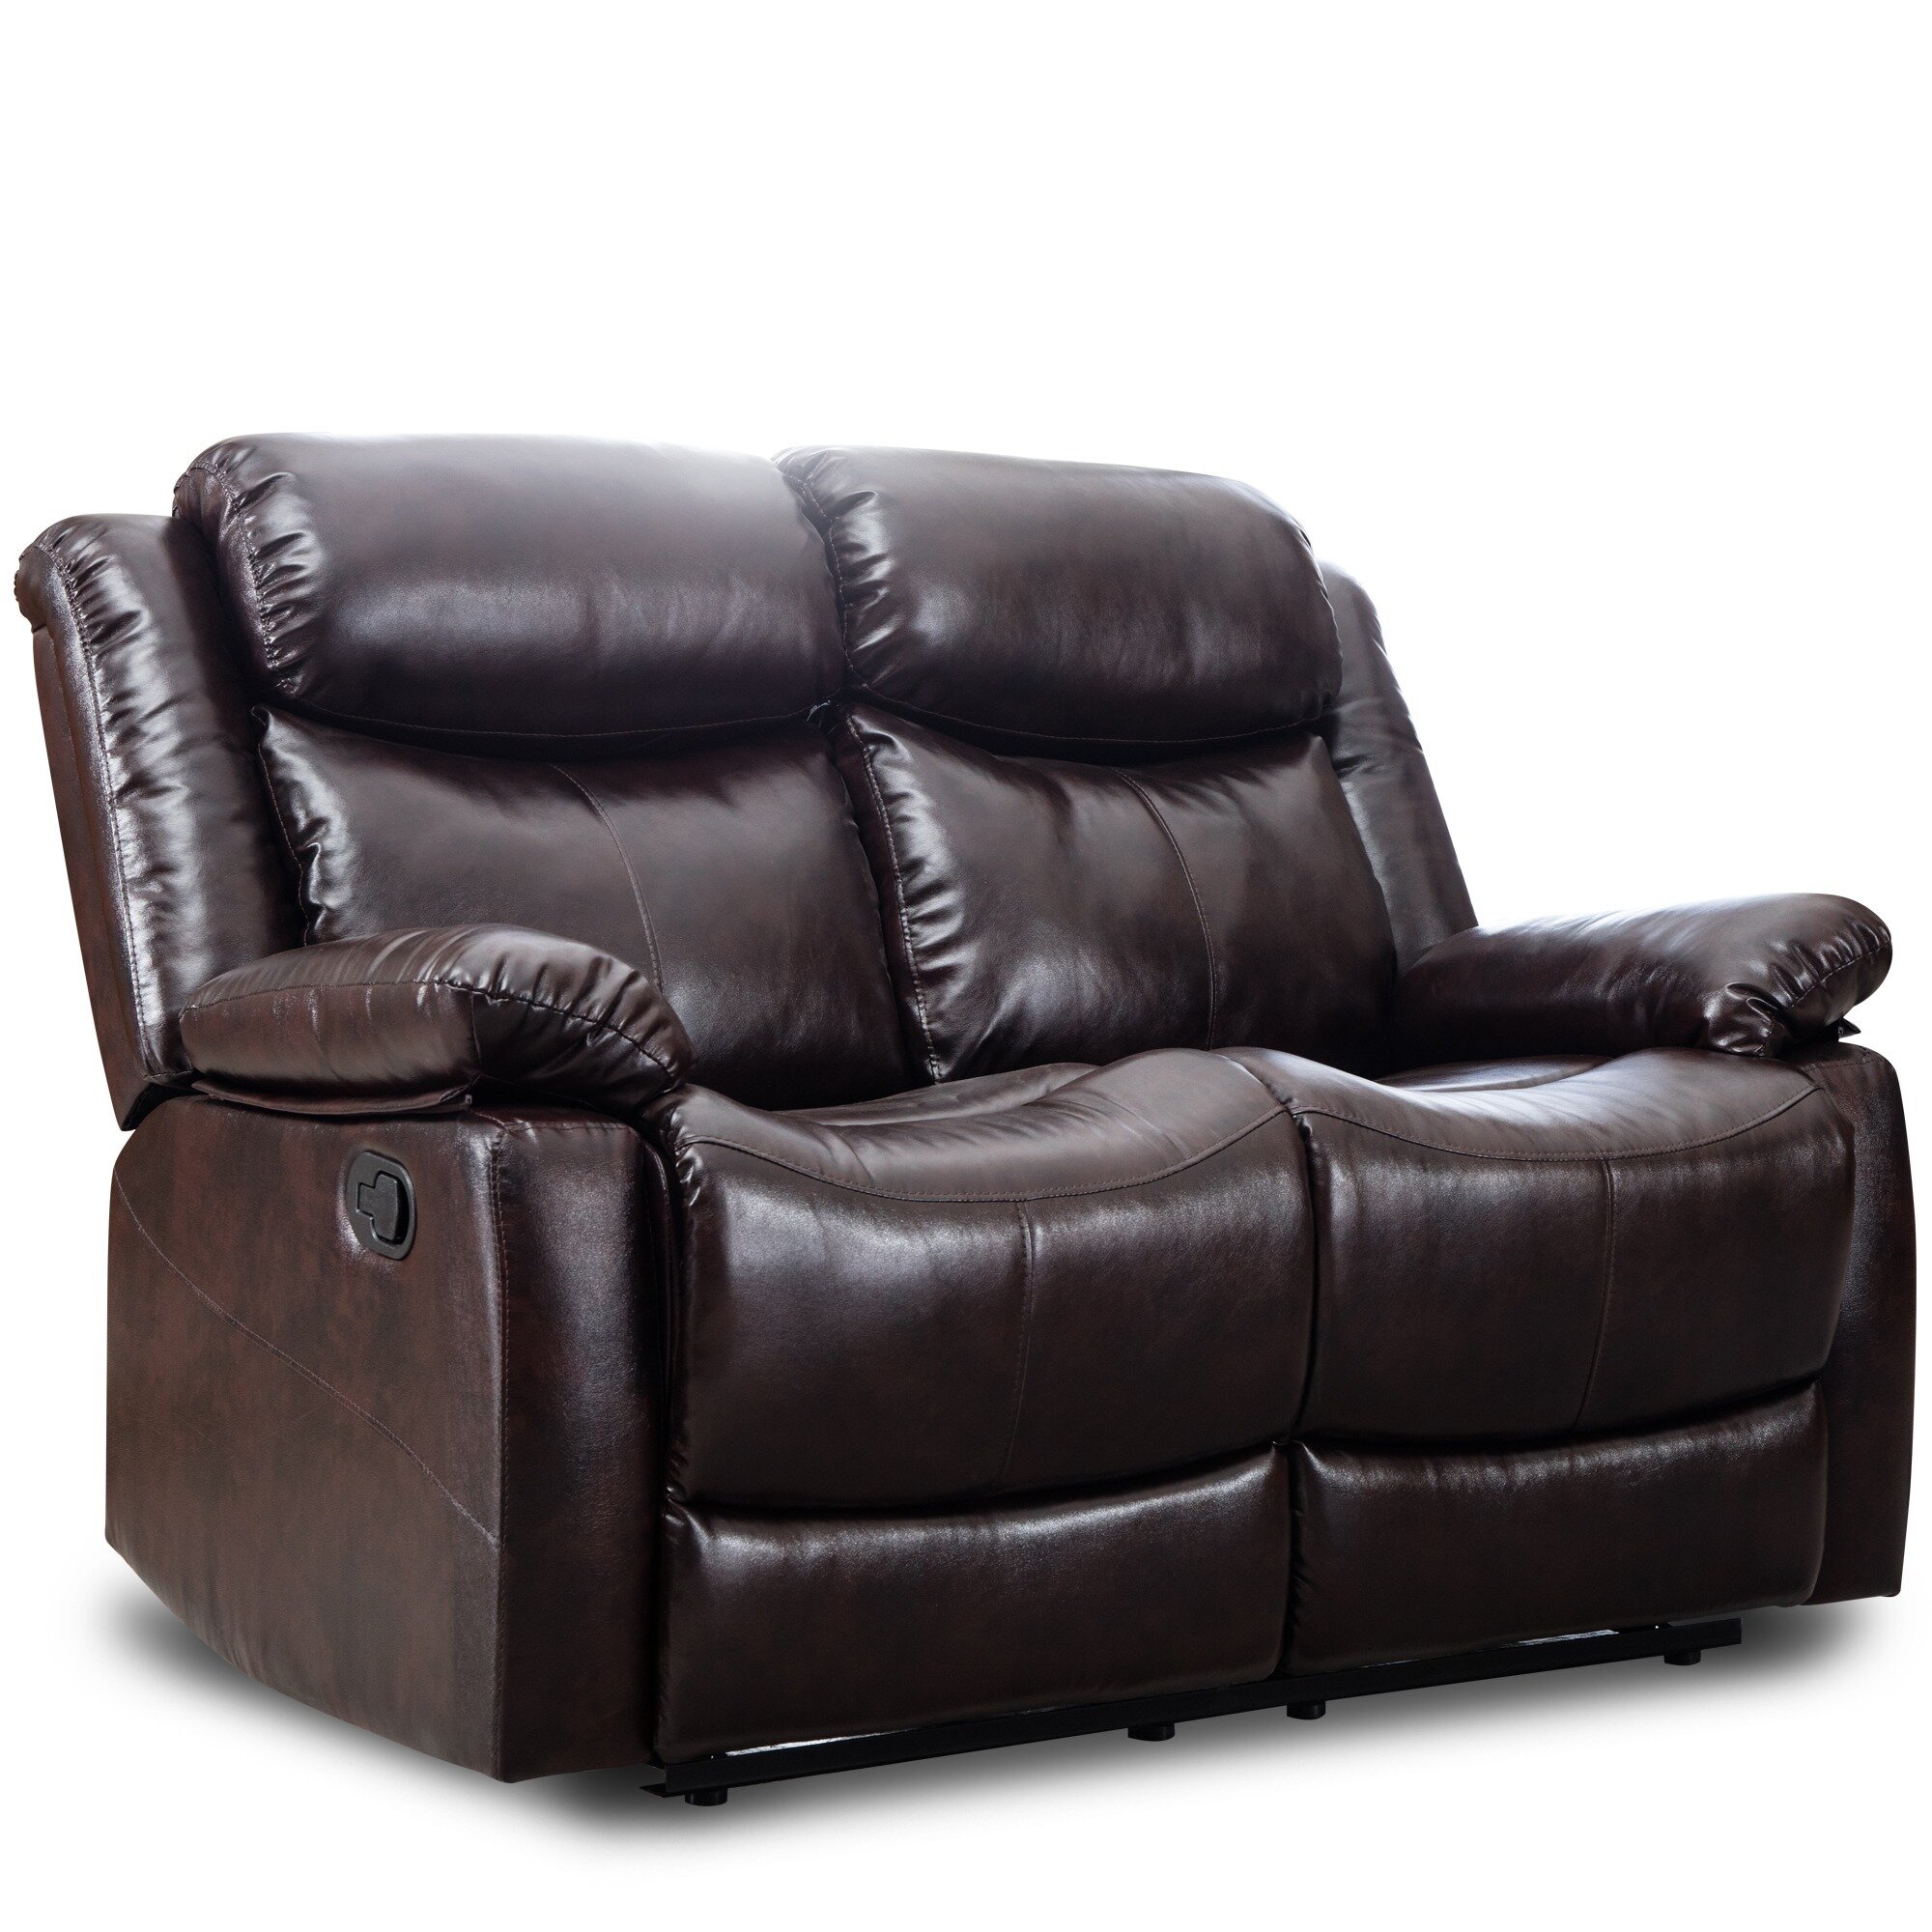 Details about   Leather Recliner Armchair Lounge Chair Velvet Reclining Cinema Studio Sofa Seat 